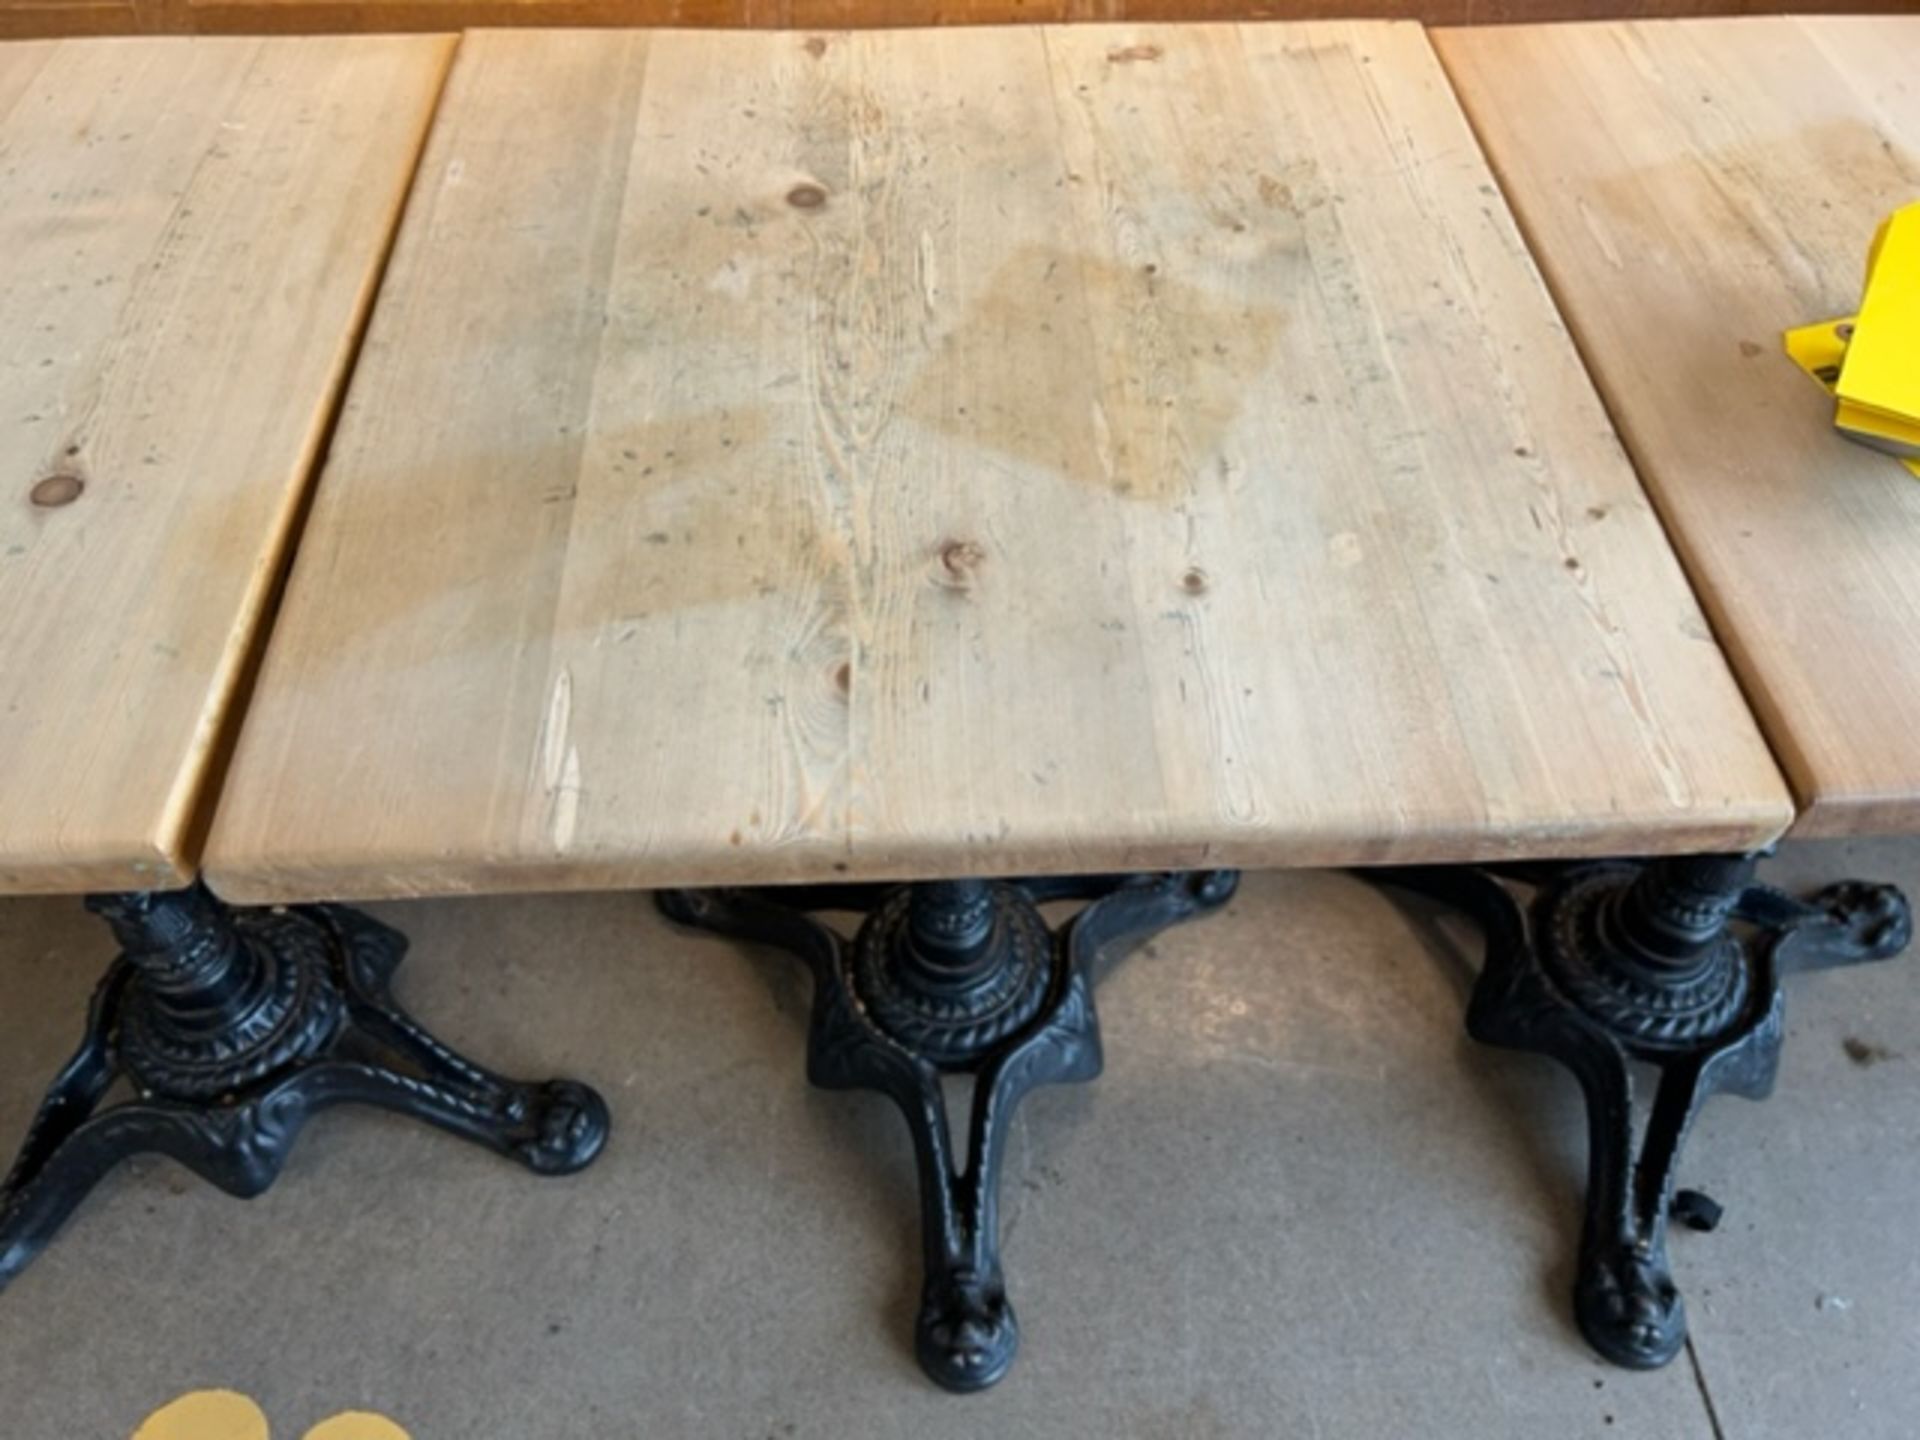 (6) Butcher Block Top Tables with Wrought Iron Bases, 23-1/2" x 23-1/2" - Image 2 of 2